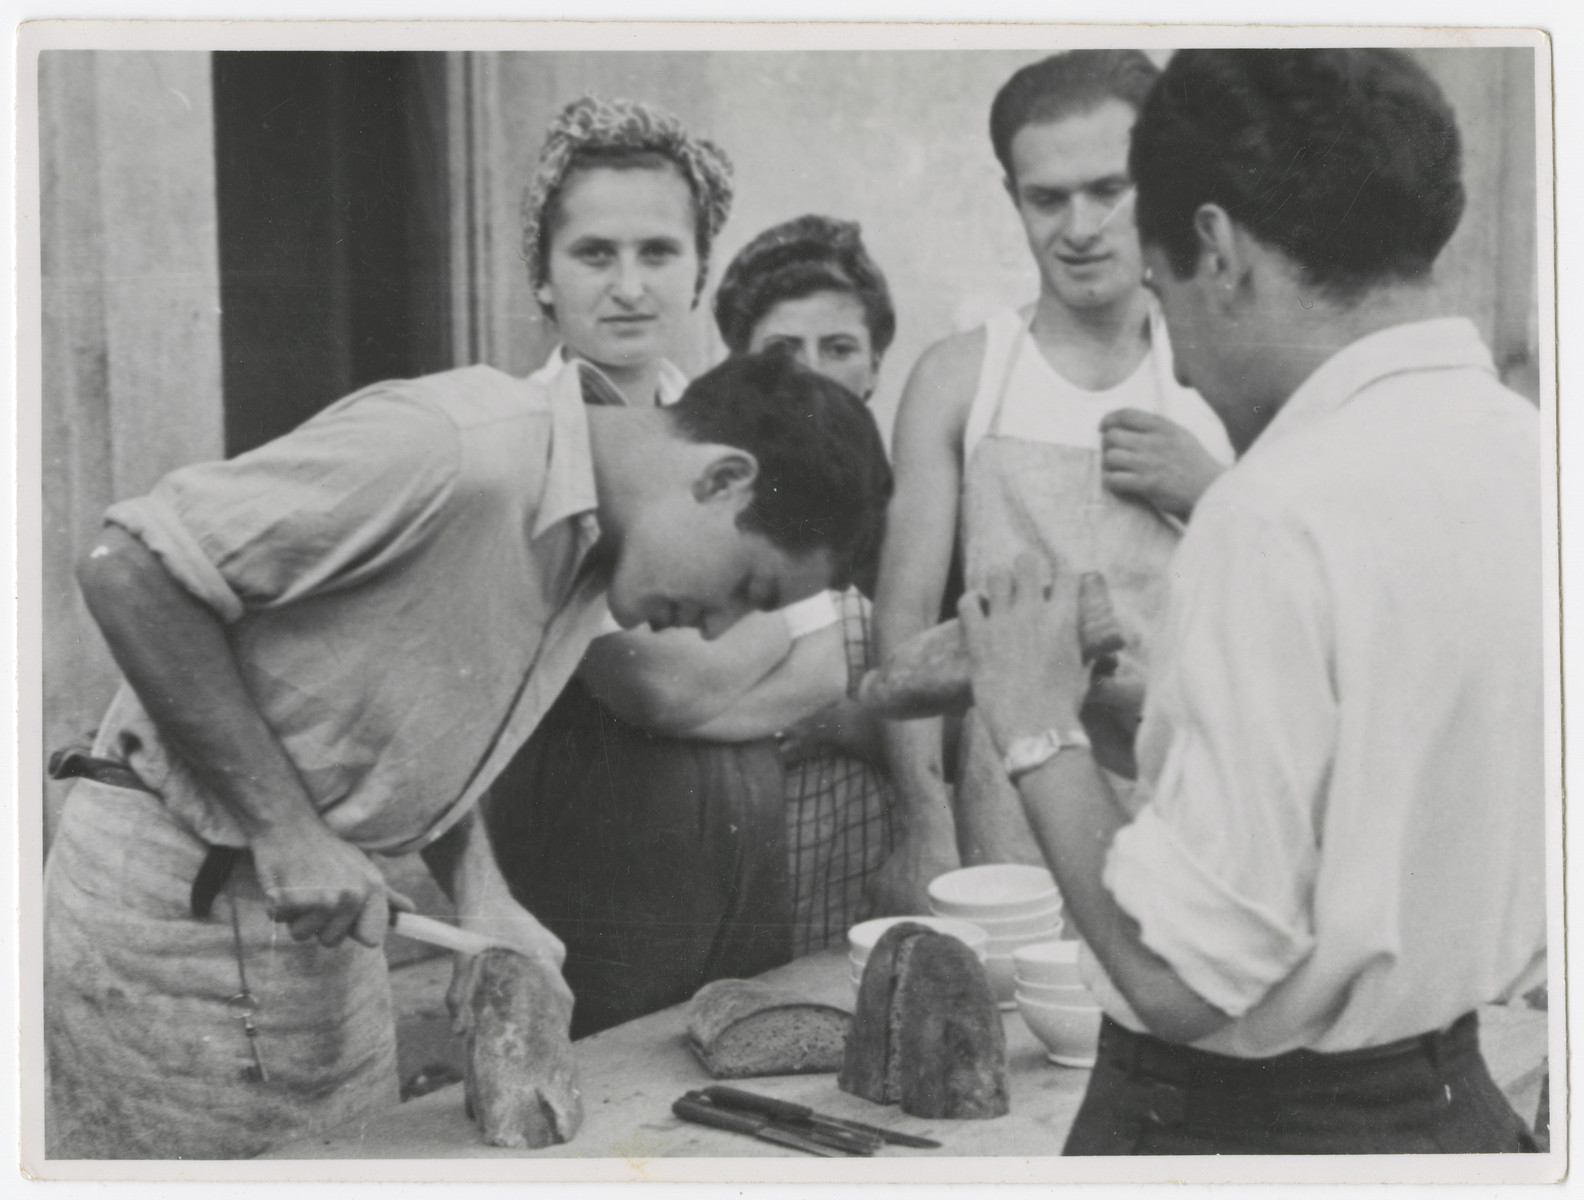 Zionist youth, some who came to Switzerland on the Kasztner transport, prepare a meal in a kibbutz hachshara near Bern.

Eva Weinberger is pictured second from the left facing the camera.  Berta Rubinsztajn is next to her partially obscured.